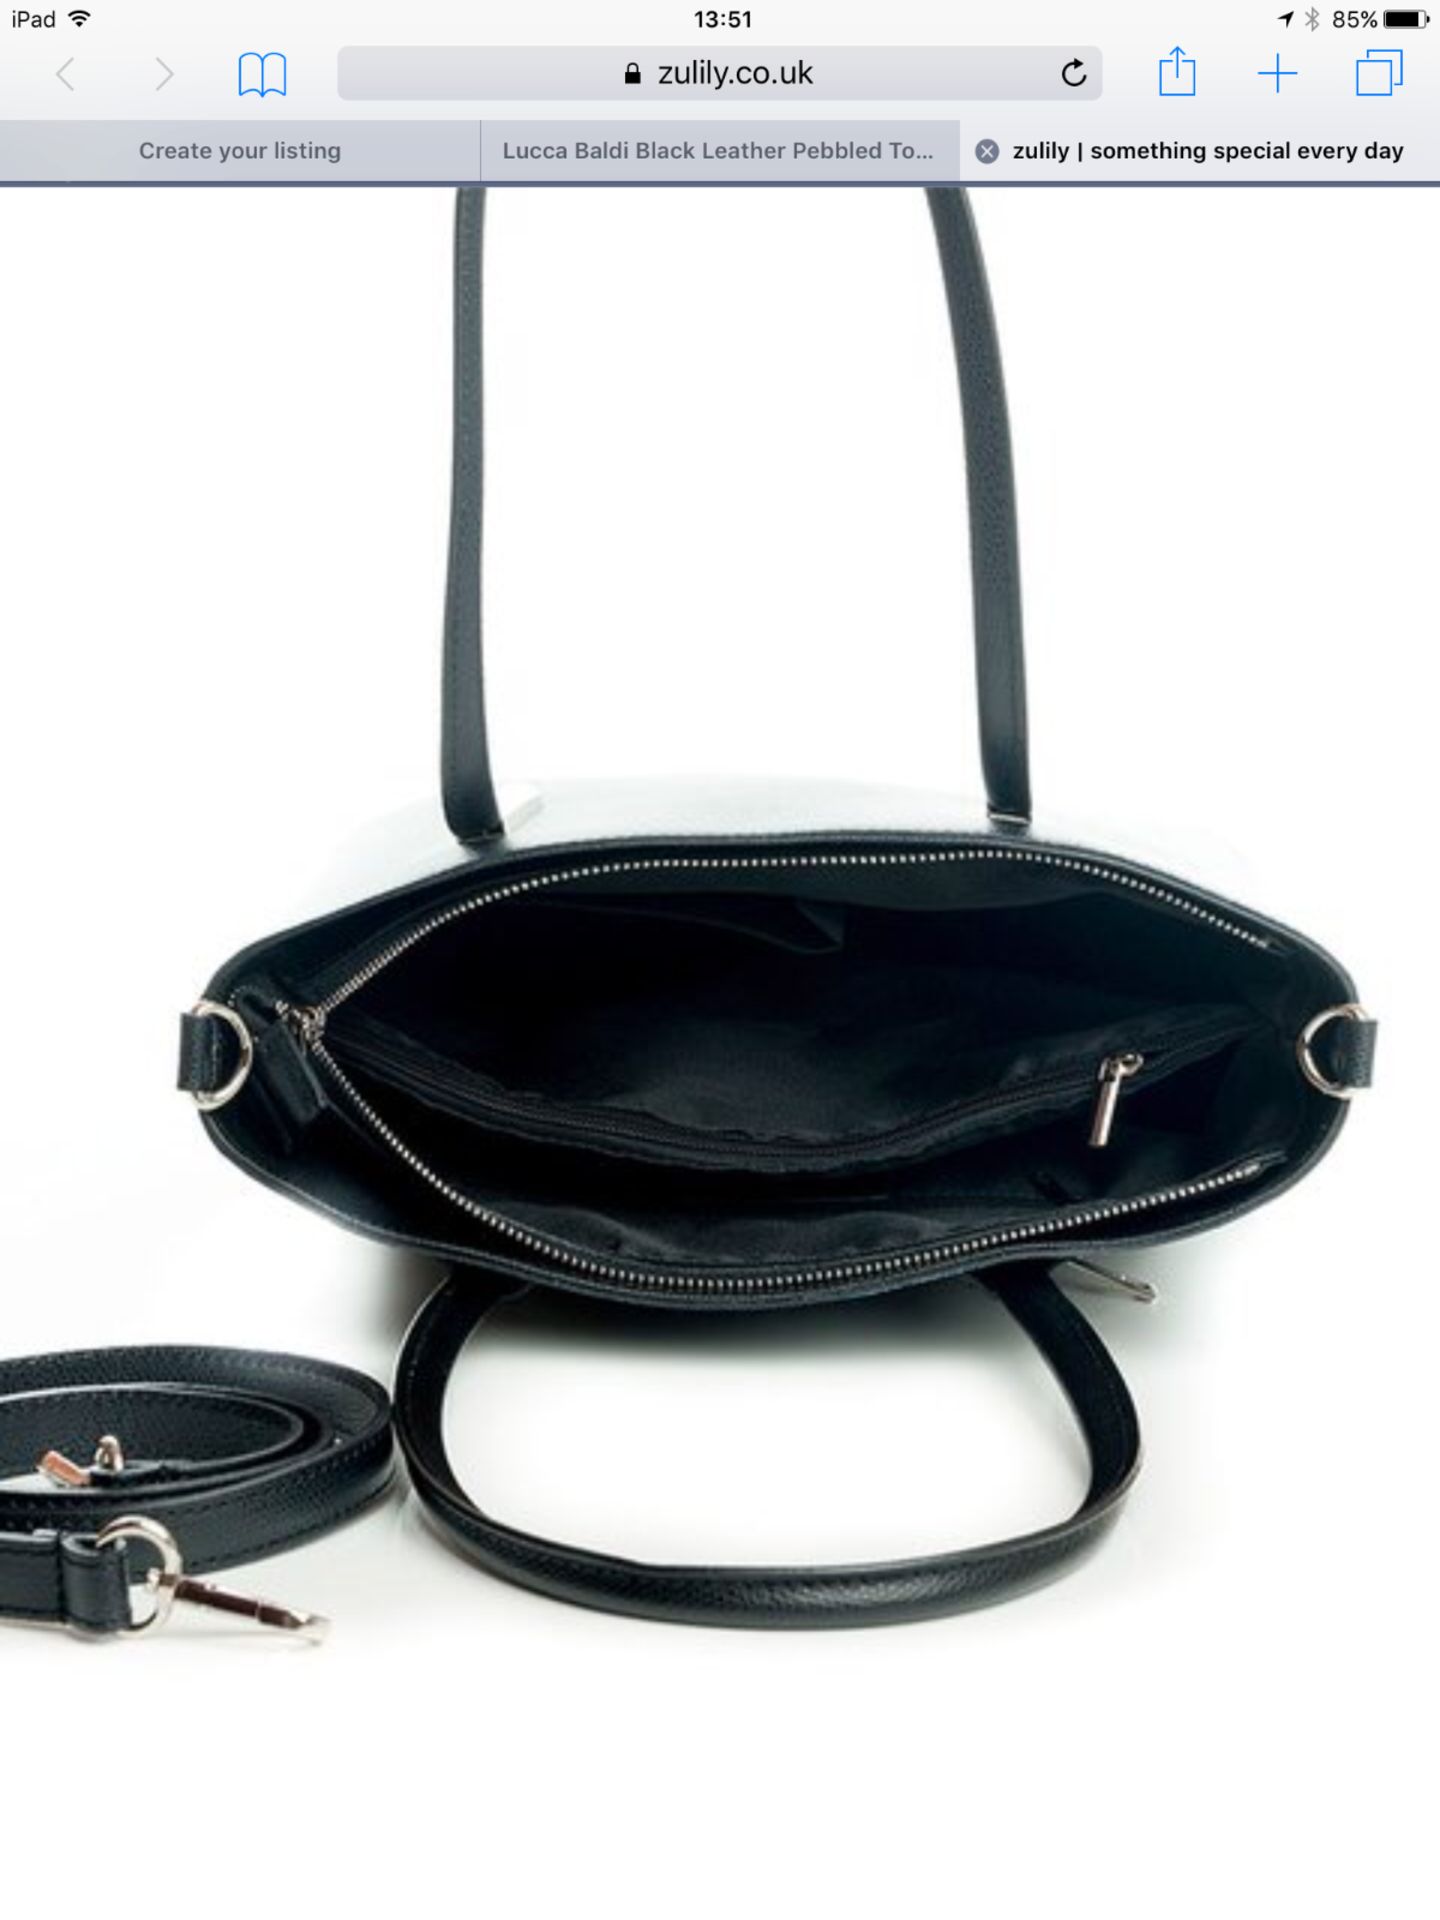 Lucca Baldi Black Leather Pebbled Tote (New with tags) [Ref: 45914641- T-101] - Image 5 of 6